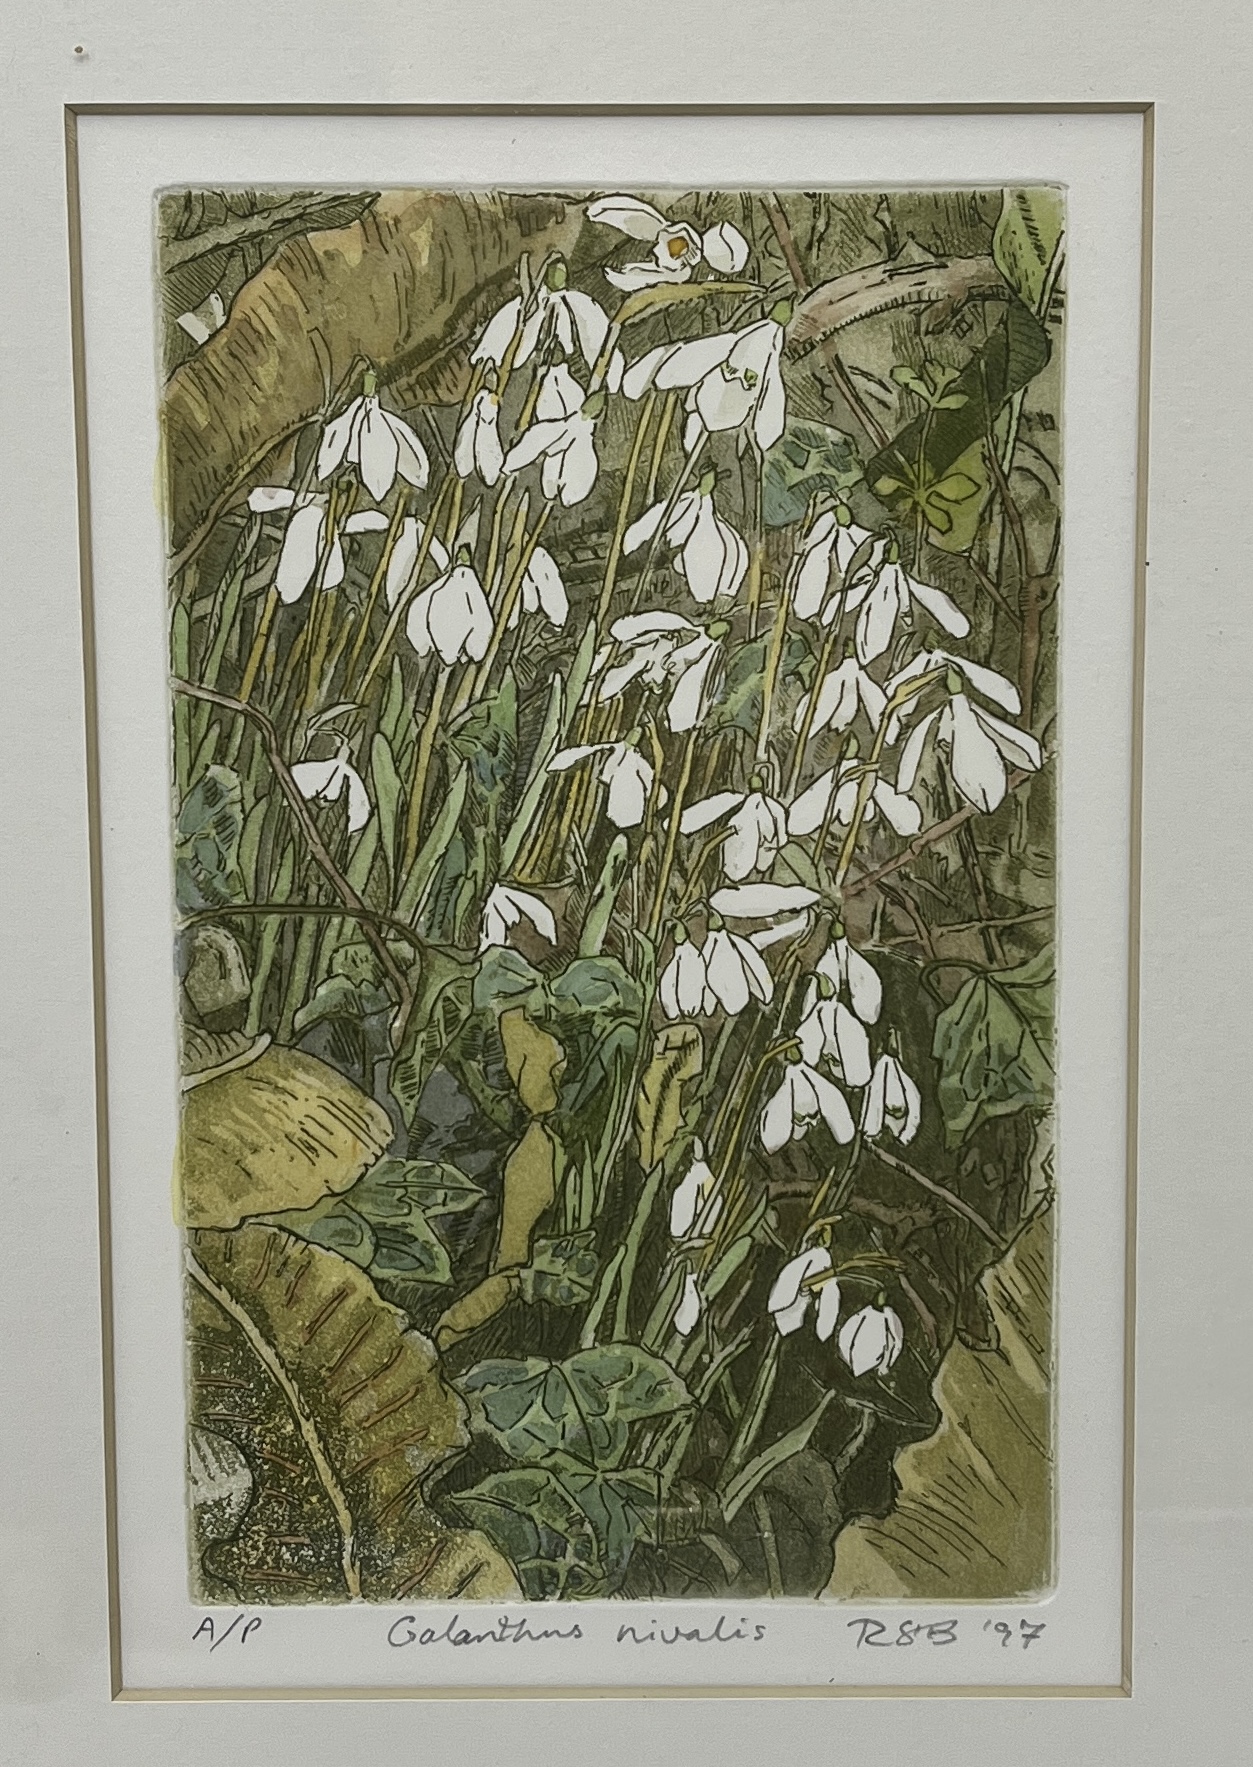 Two limited edition prints by Roger St Barbe, "Dactylorhiza Fuchsia" etched aquatint signed and - Image 2 of 3